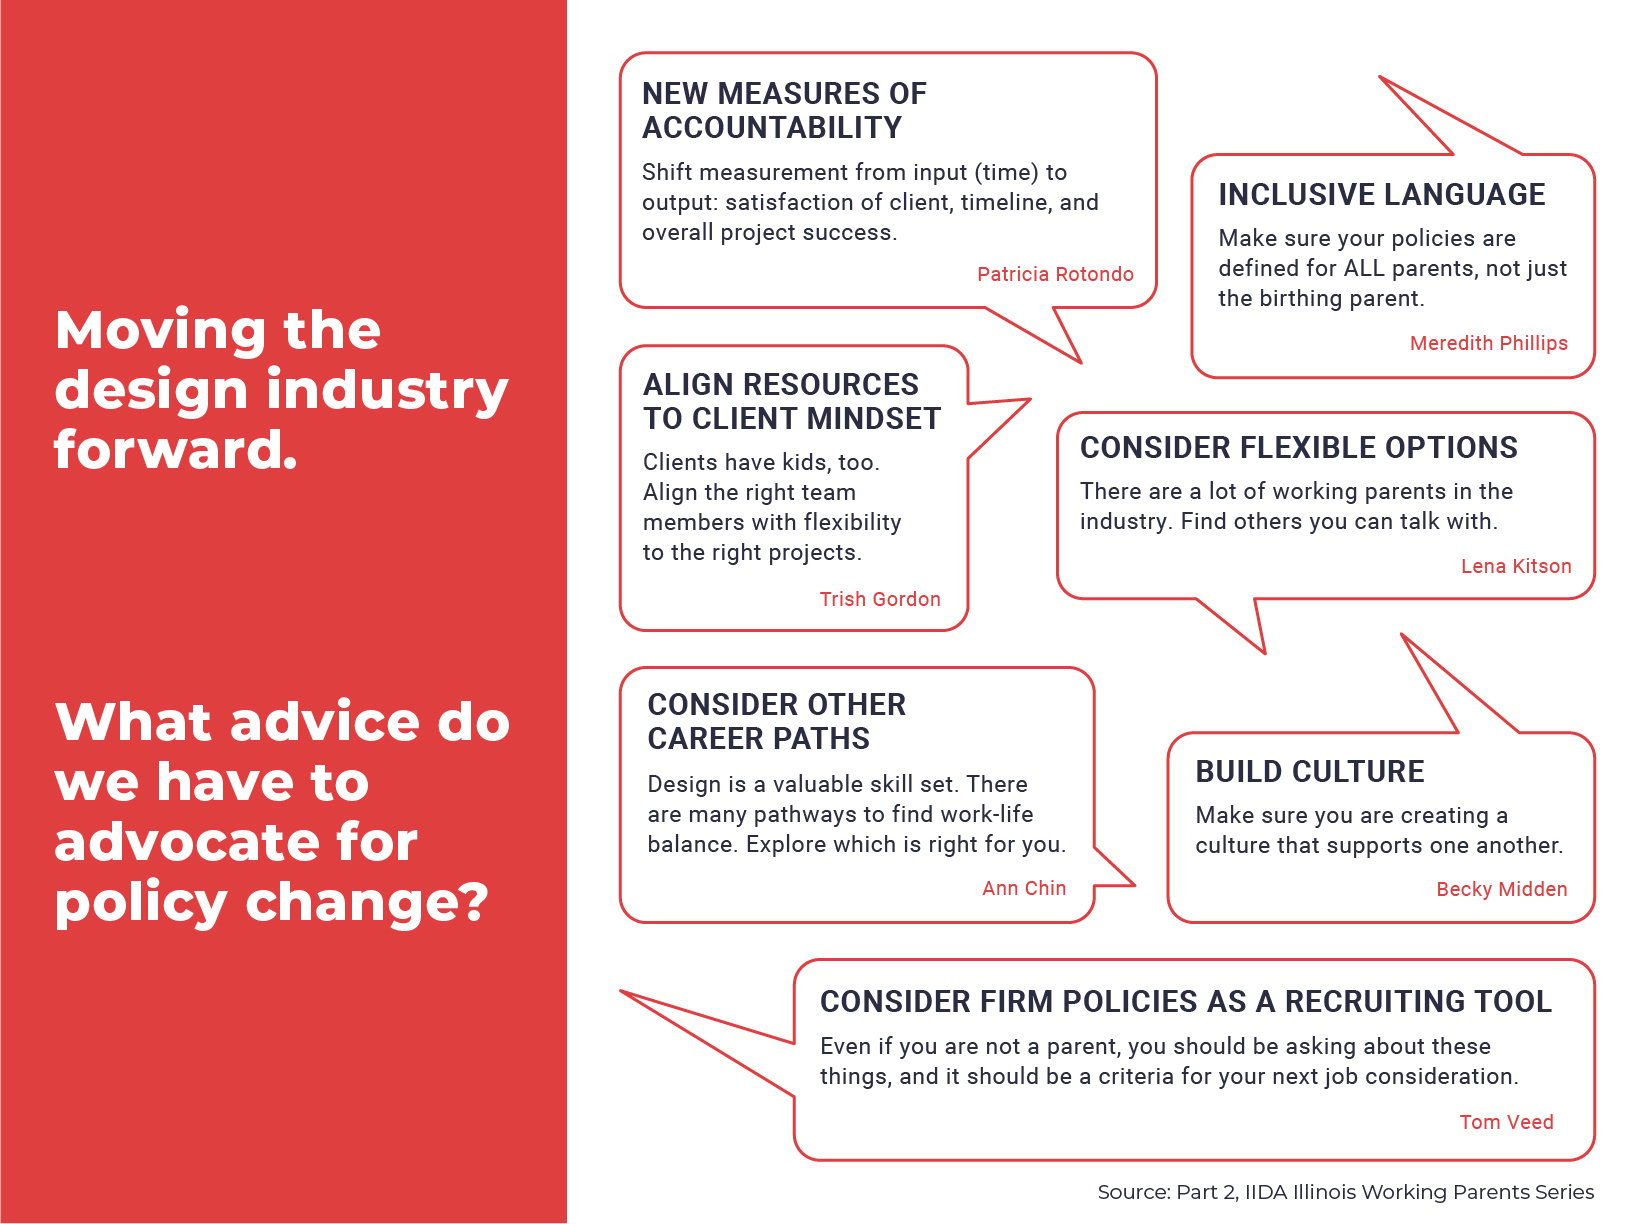 ThinkLab and IIDA Working Parents Graphic Showcasing Advice for Policy Change